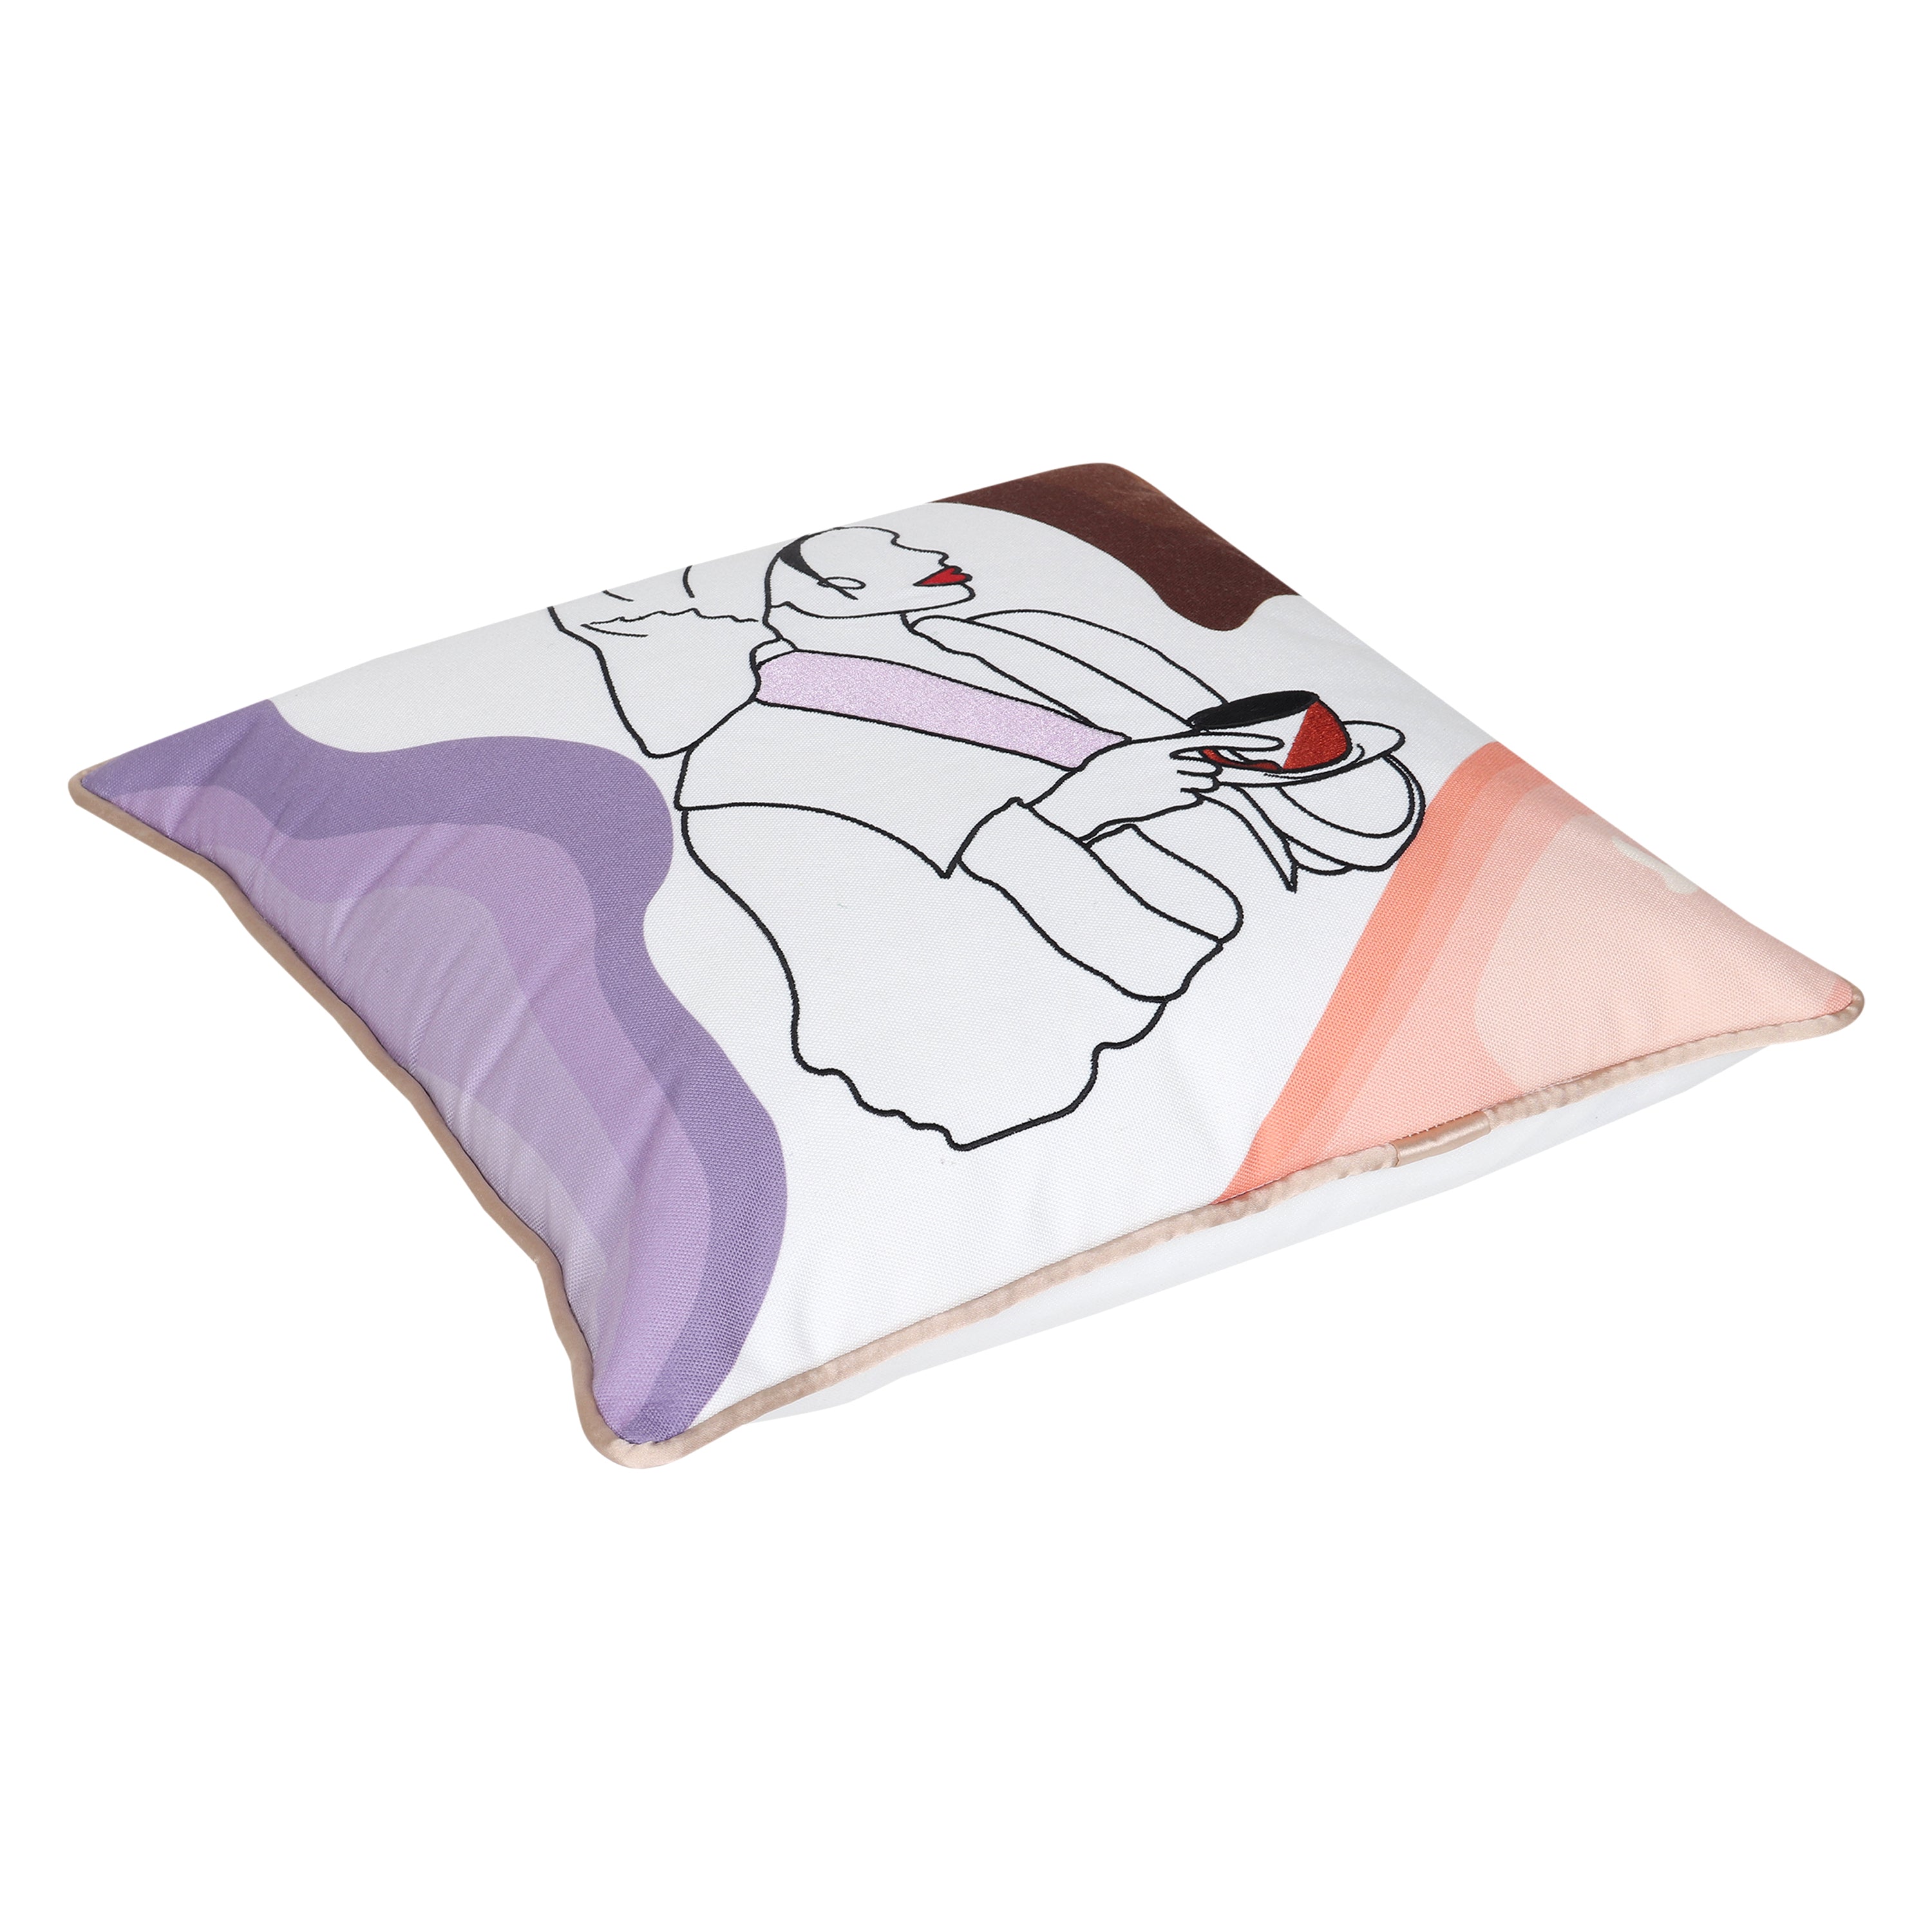 Line Art Embroidered Cushion Cover - Nurturing the Goddess